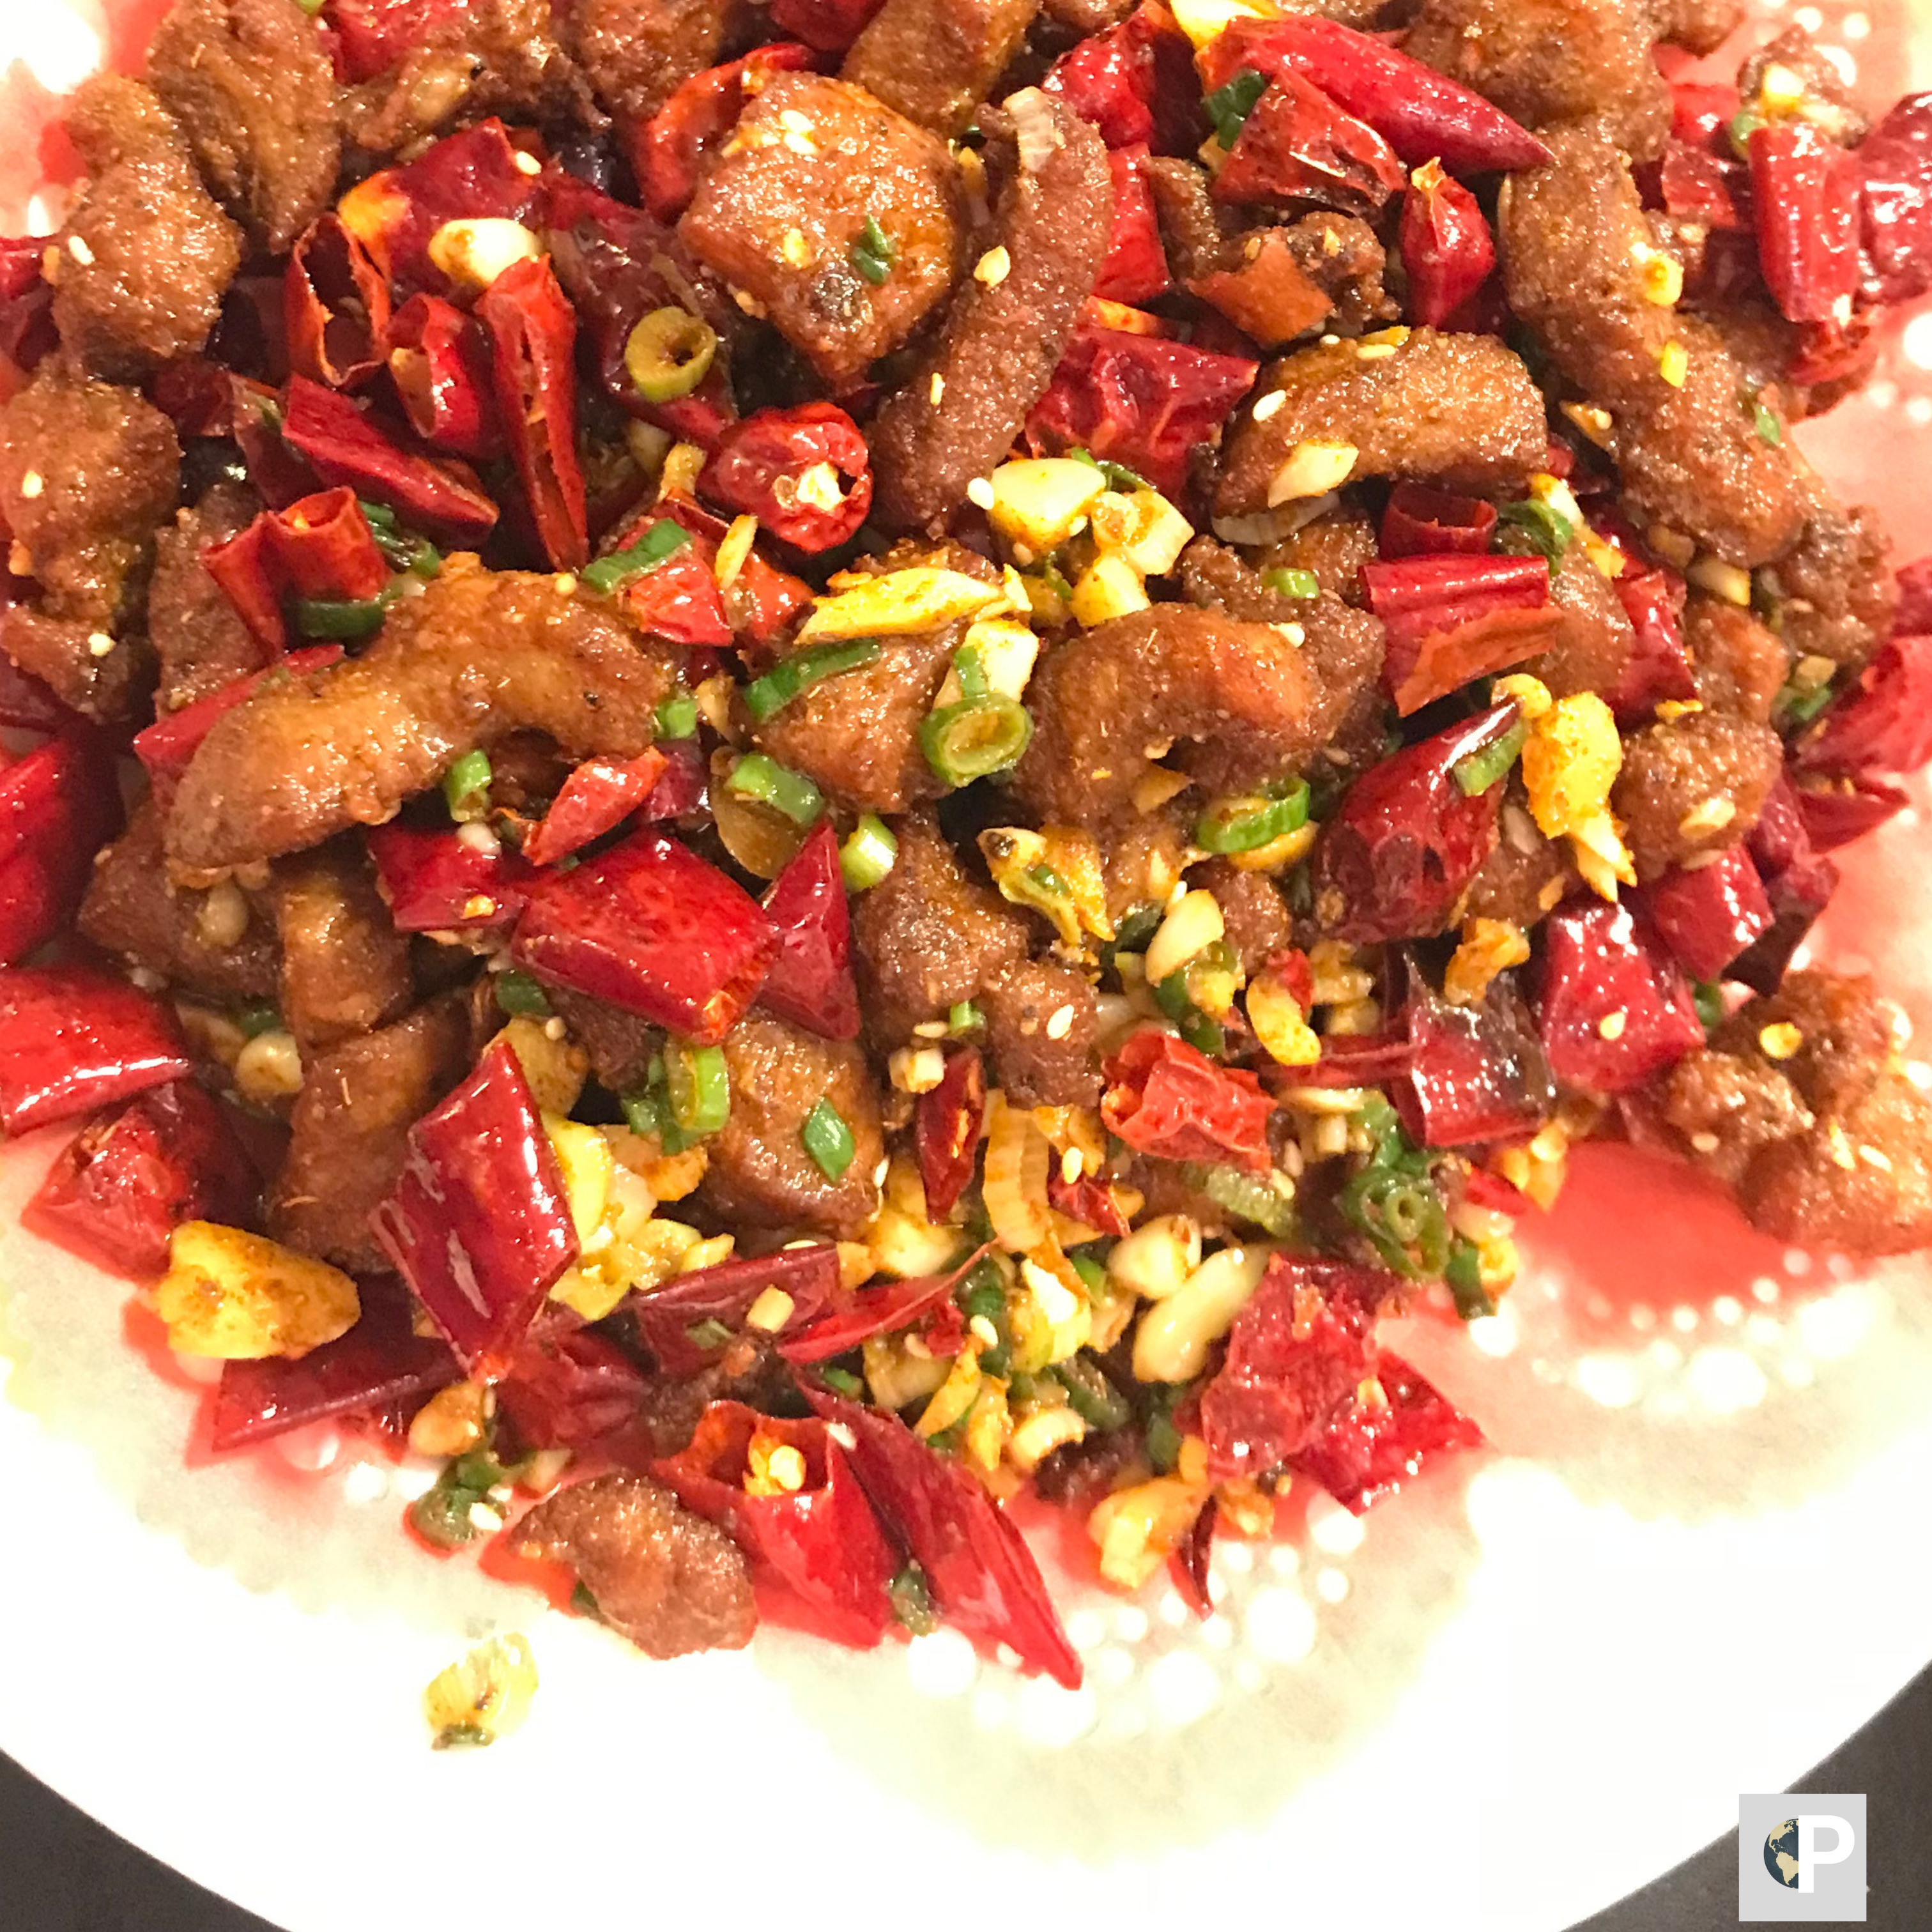 Cumin fried meat with aromatic spices at 川耗仔食府, one of the Chinese restaurants in Taoyuan